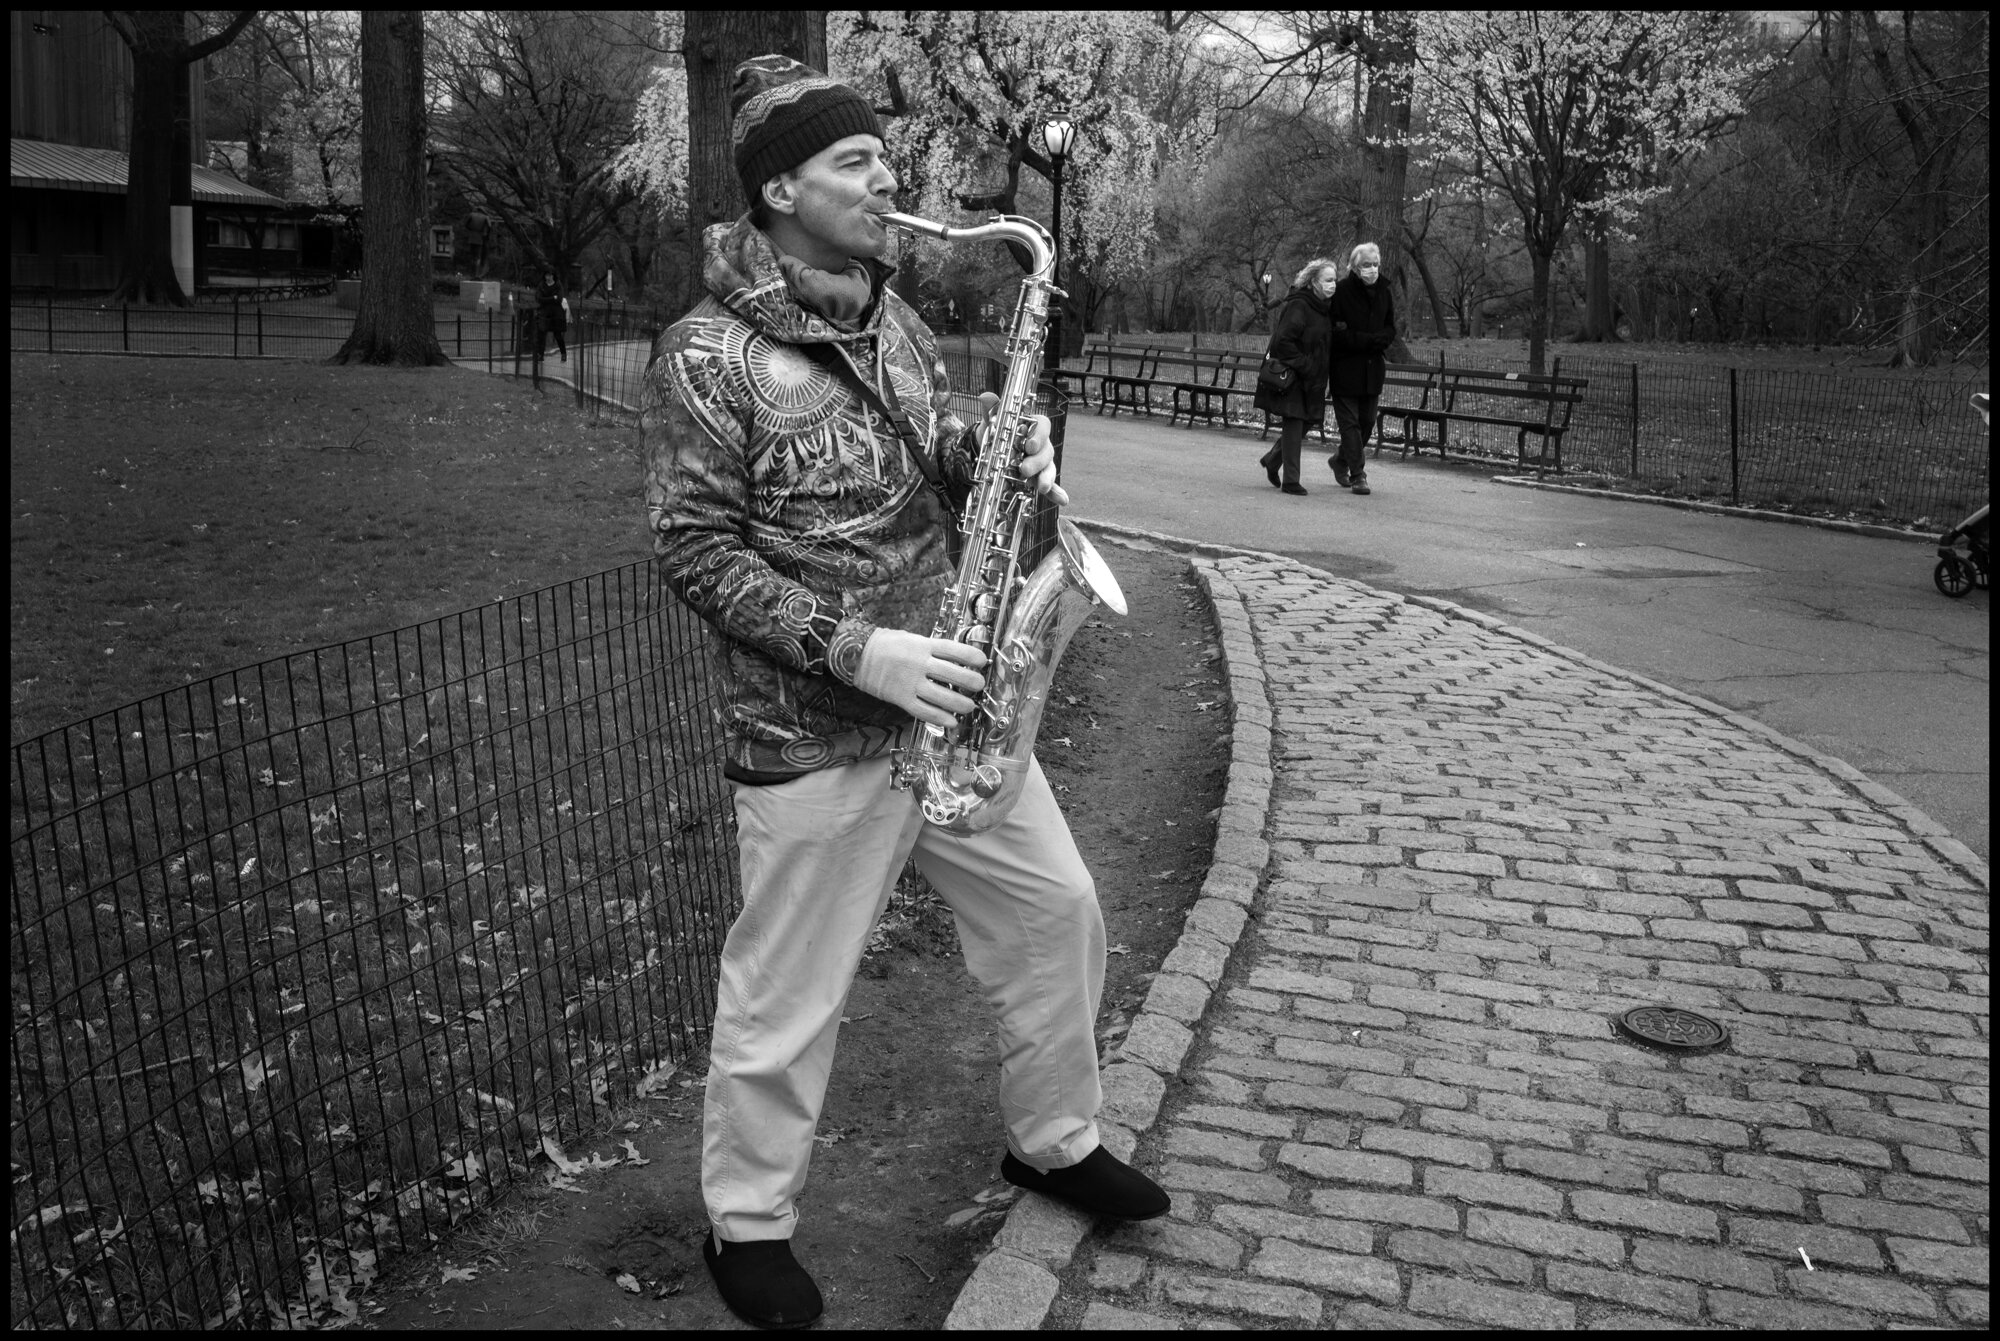  Martin, originally from Manchester, was playing the saxophone in the park. I asked him how he was handling this crisis and he told me, “music is a kind of defiance”. This spoke to me deeply, as I have always felt that way profoundly about photograph